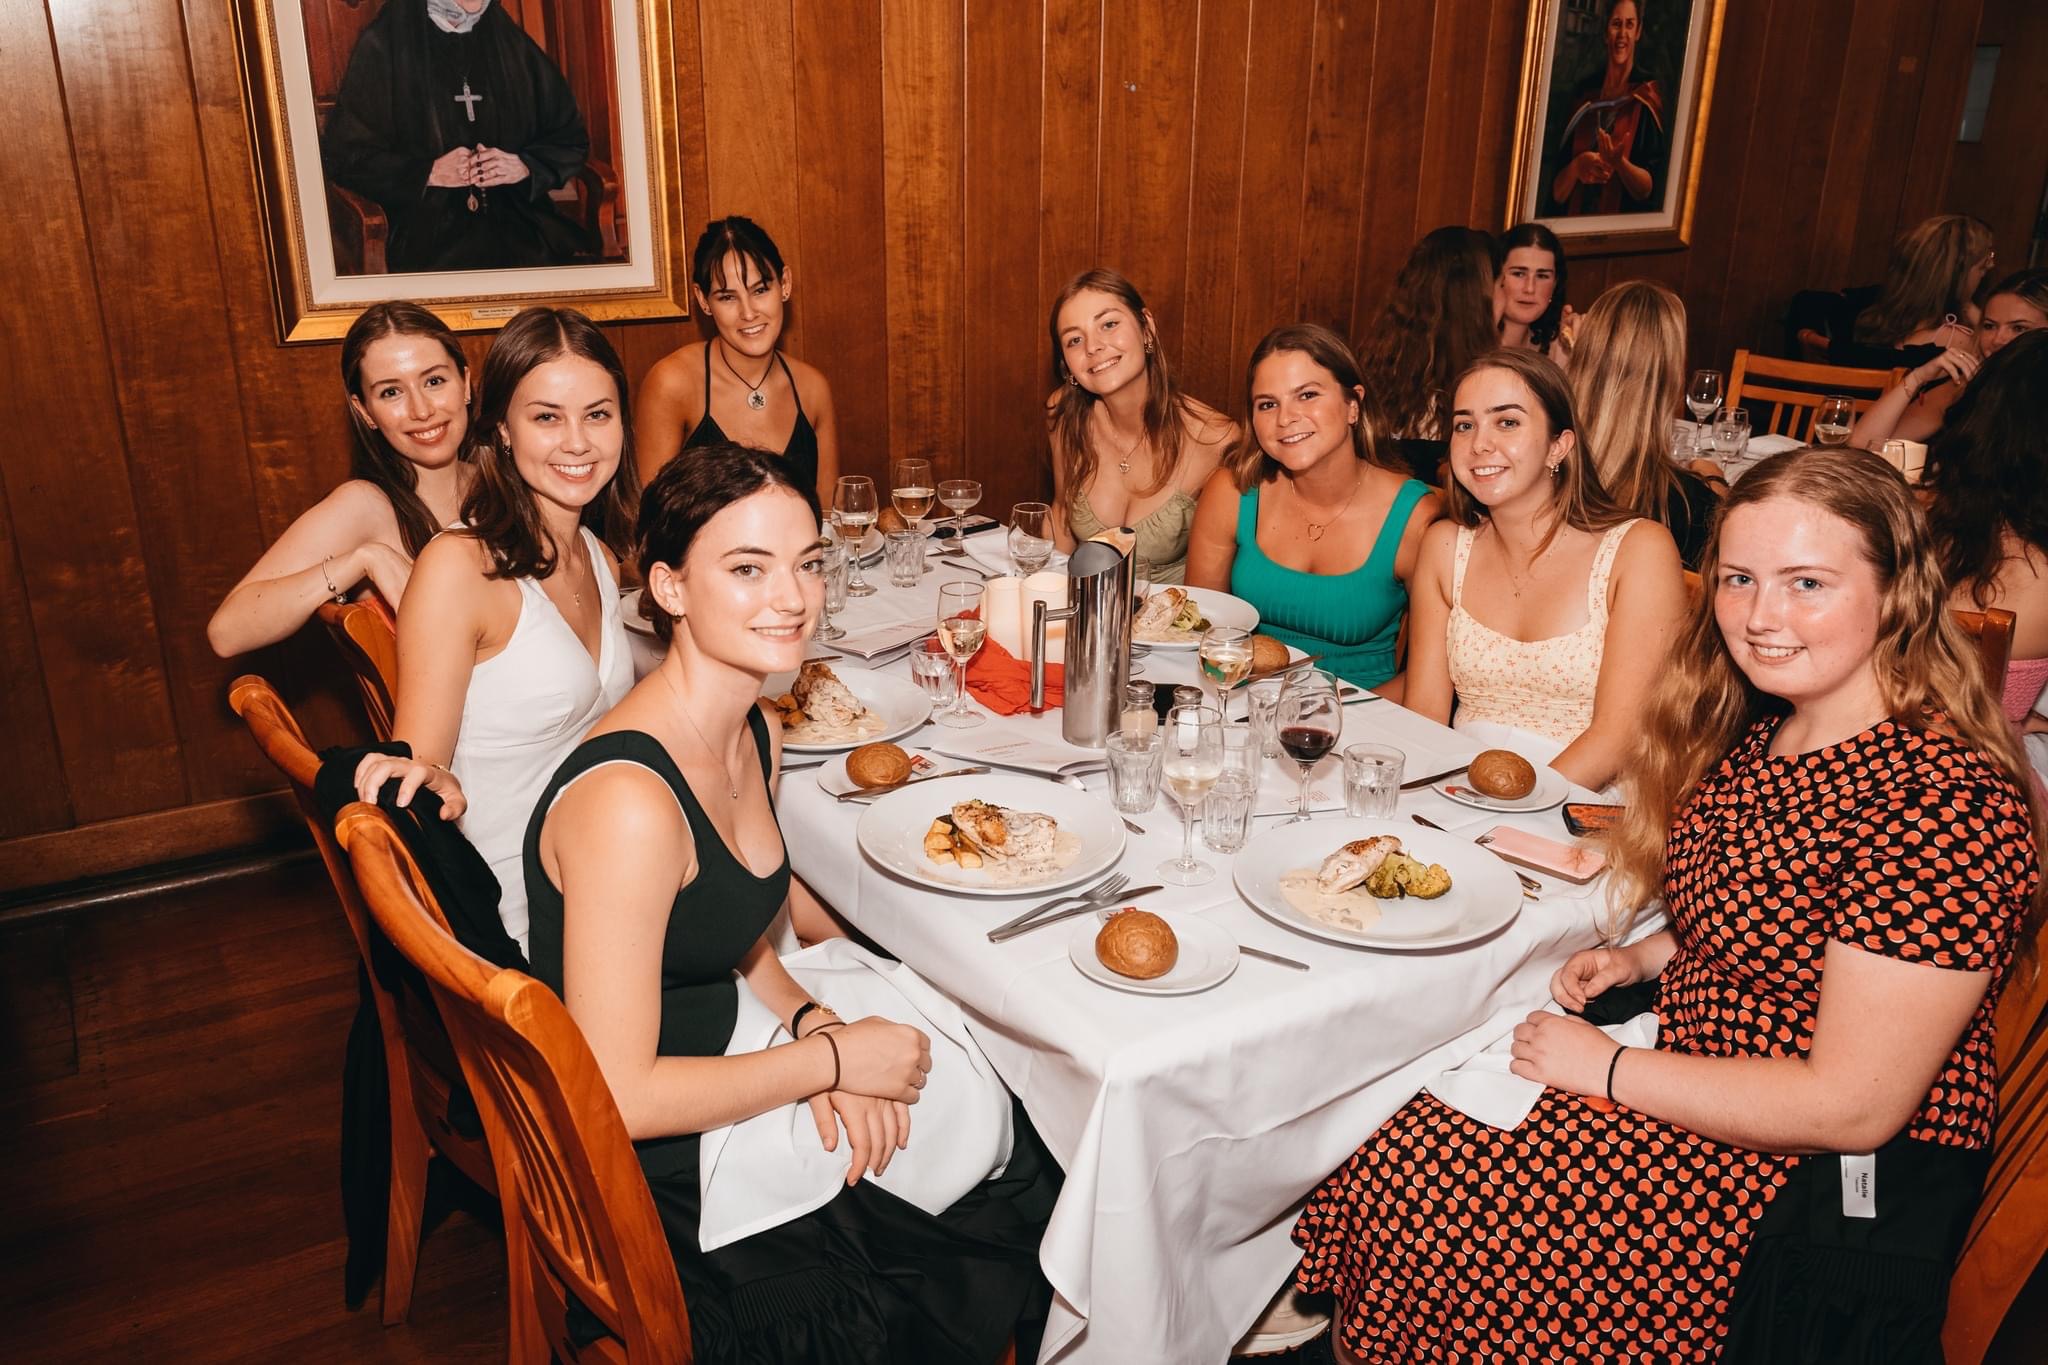 Country Education Foundation of Australia alumnus, Josie Kearney, seated at the head of the table, enjoys a meal with fellow students at Sancta Sophia College.